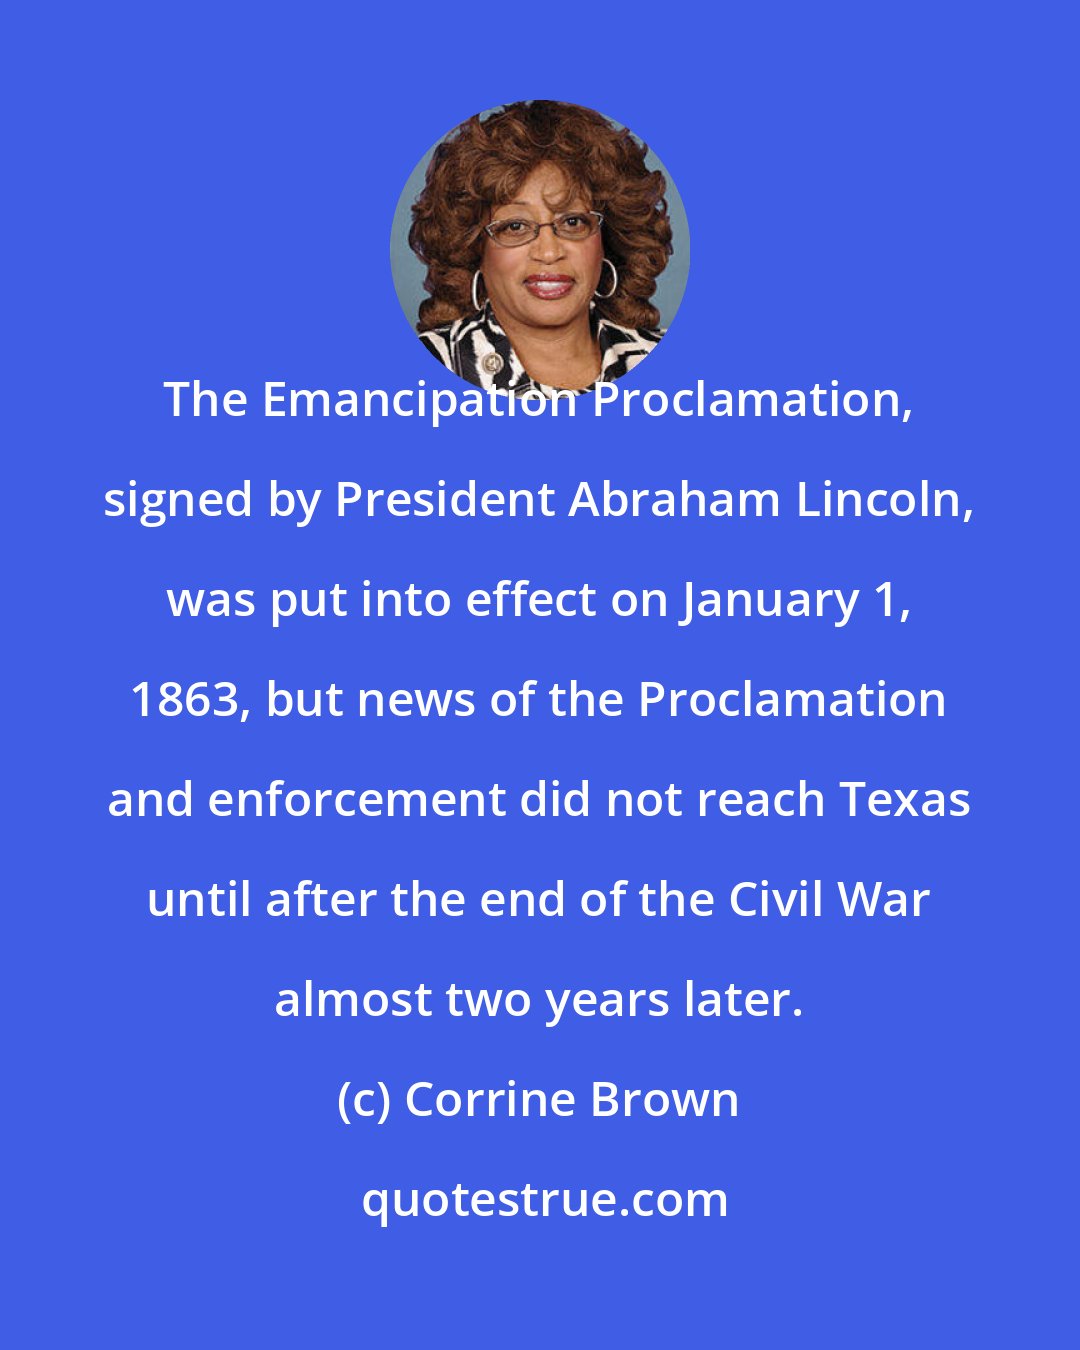 Corrine Brown: The Emancipation Proclamation, signed by President Abraham Lincoln, was put into effect on January 1, 1863, but news of the Proclamation and enforcement did not reach Texas until after the end of the Civil War almost two years later.